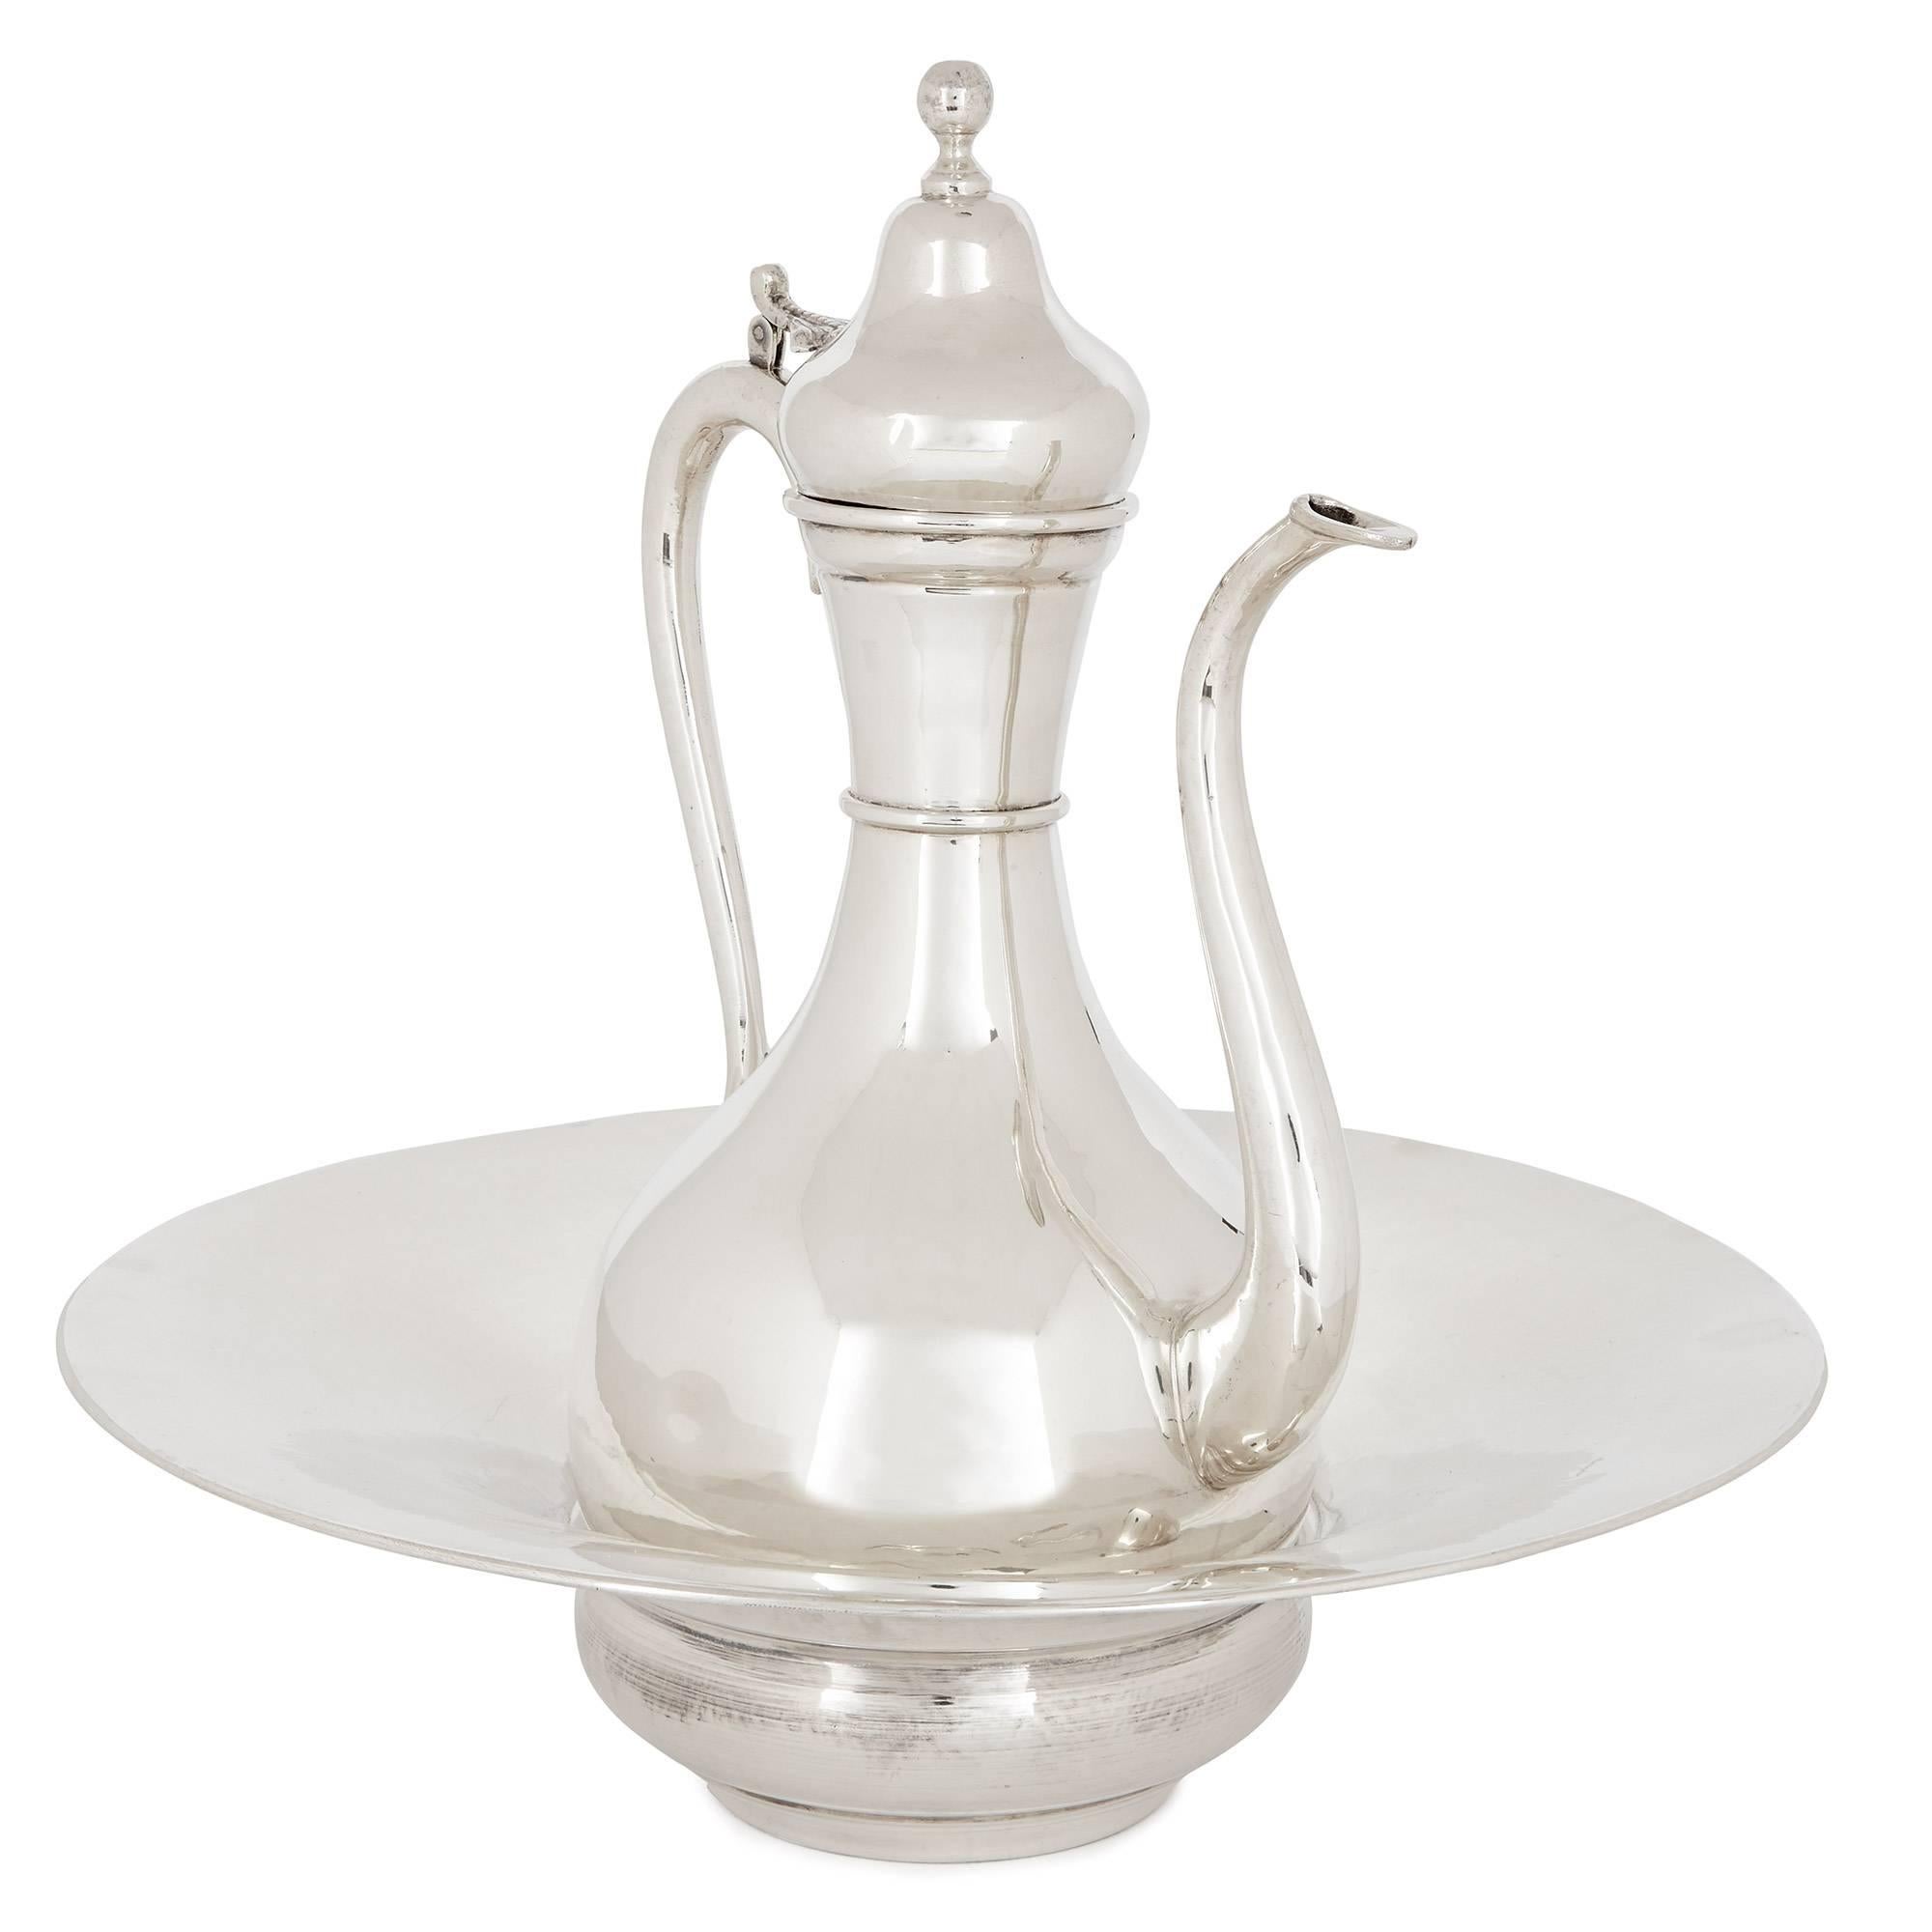 This silver ewer and basin, originally designed for handwashing before meals and for important occasions, is a beautiful piece of Turkish craftsmanship, in the Ottoman style. Crafted from solid silver, the ewer is elegantly shaped with a round base